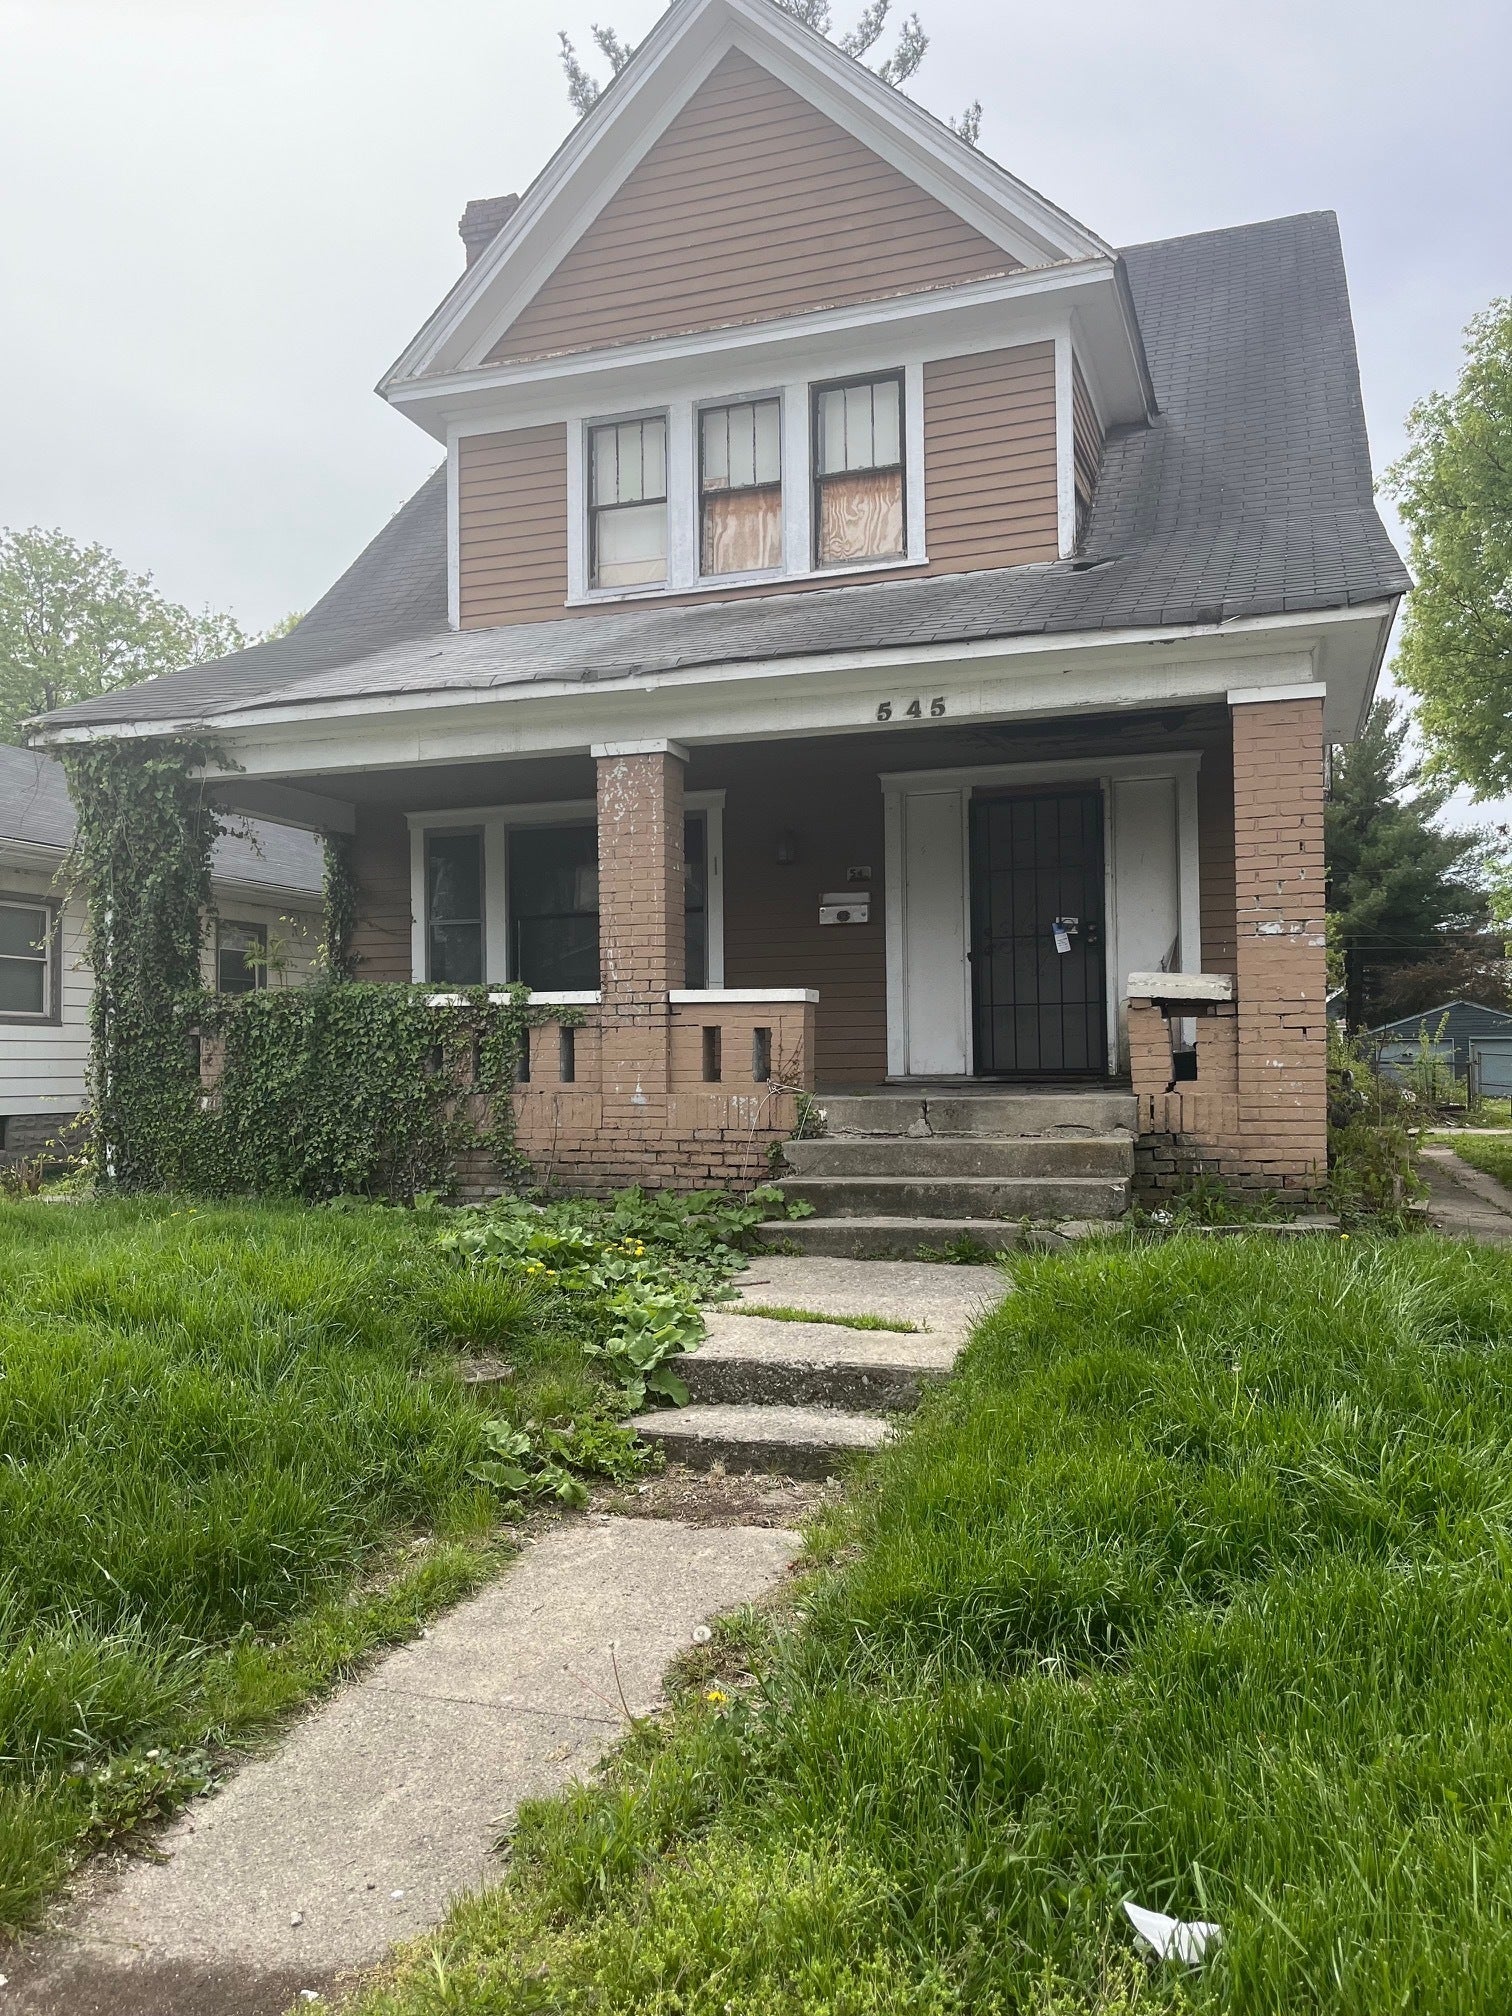 Photo of 545 W 29th Street Indianapolis, IN 46208